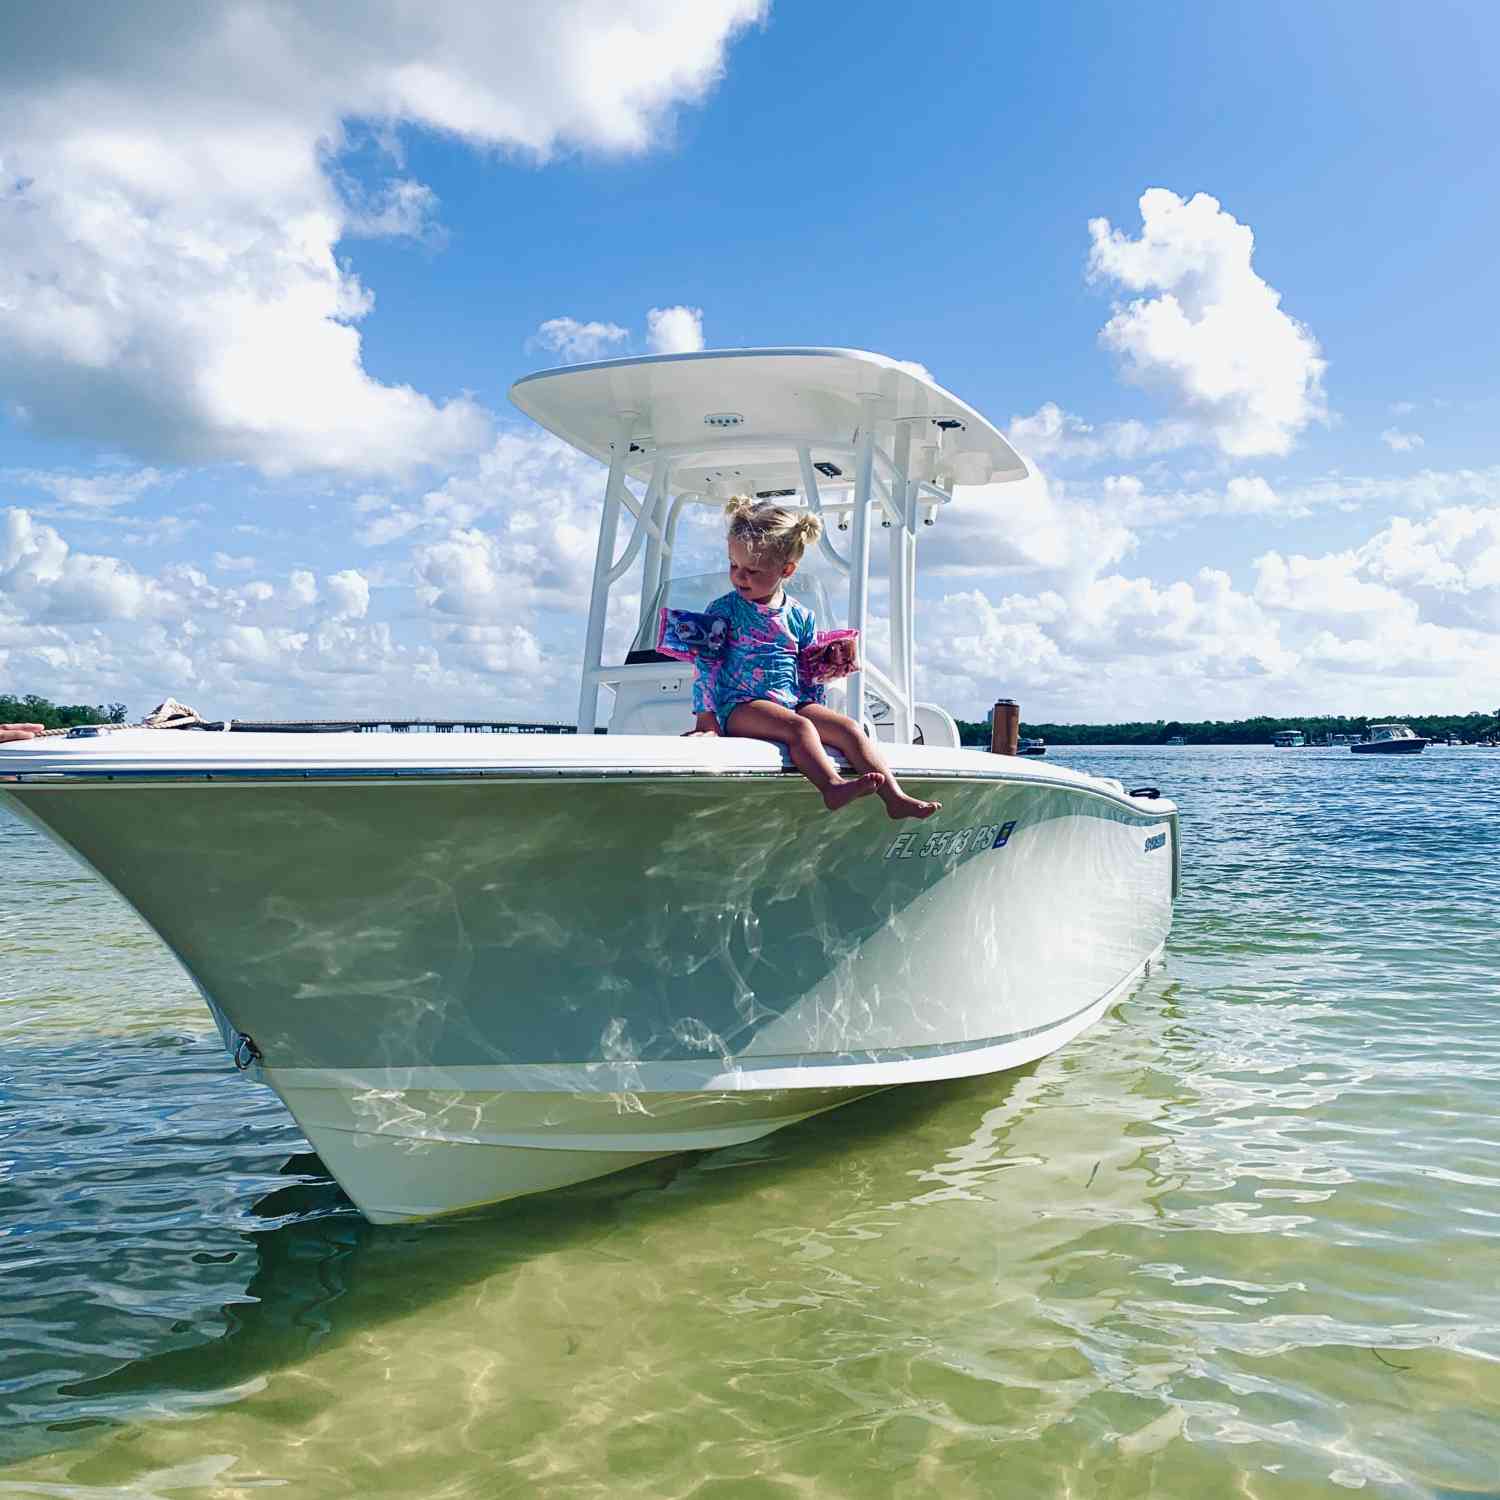 Title: My Girl - On board their Sportsman Open 232 Center Console - Location: Fort Myers Beach, FL. Participating in the Photo Contest #SportsmanFebruary2021